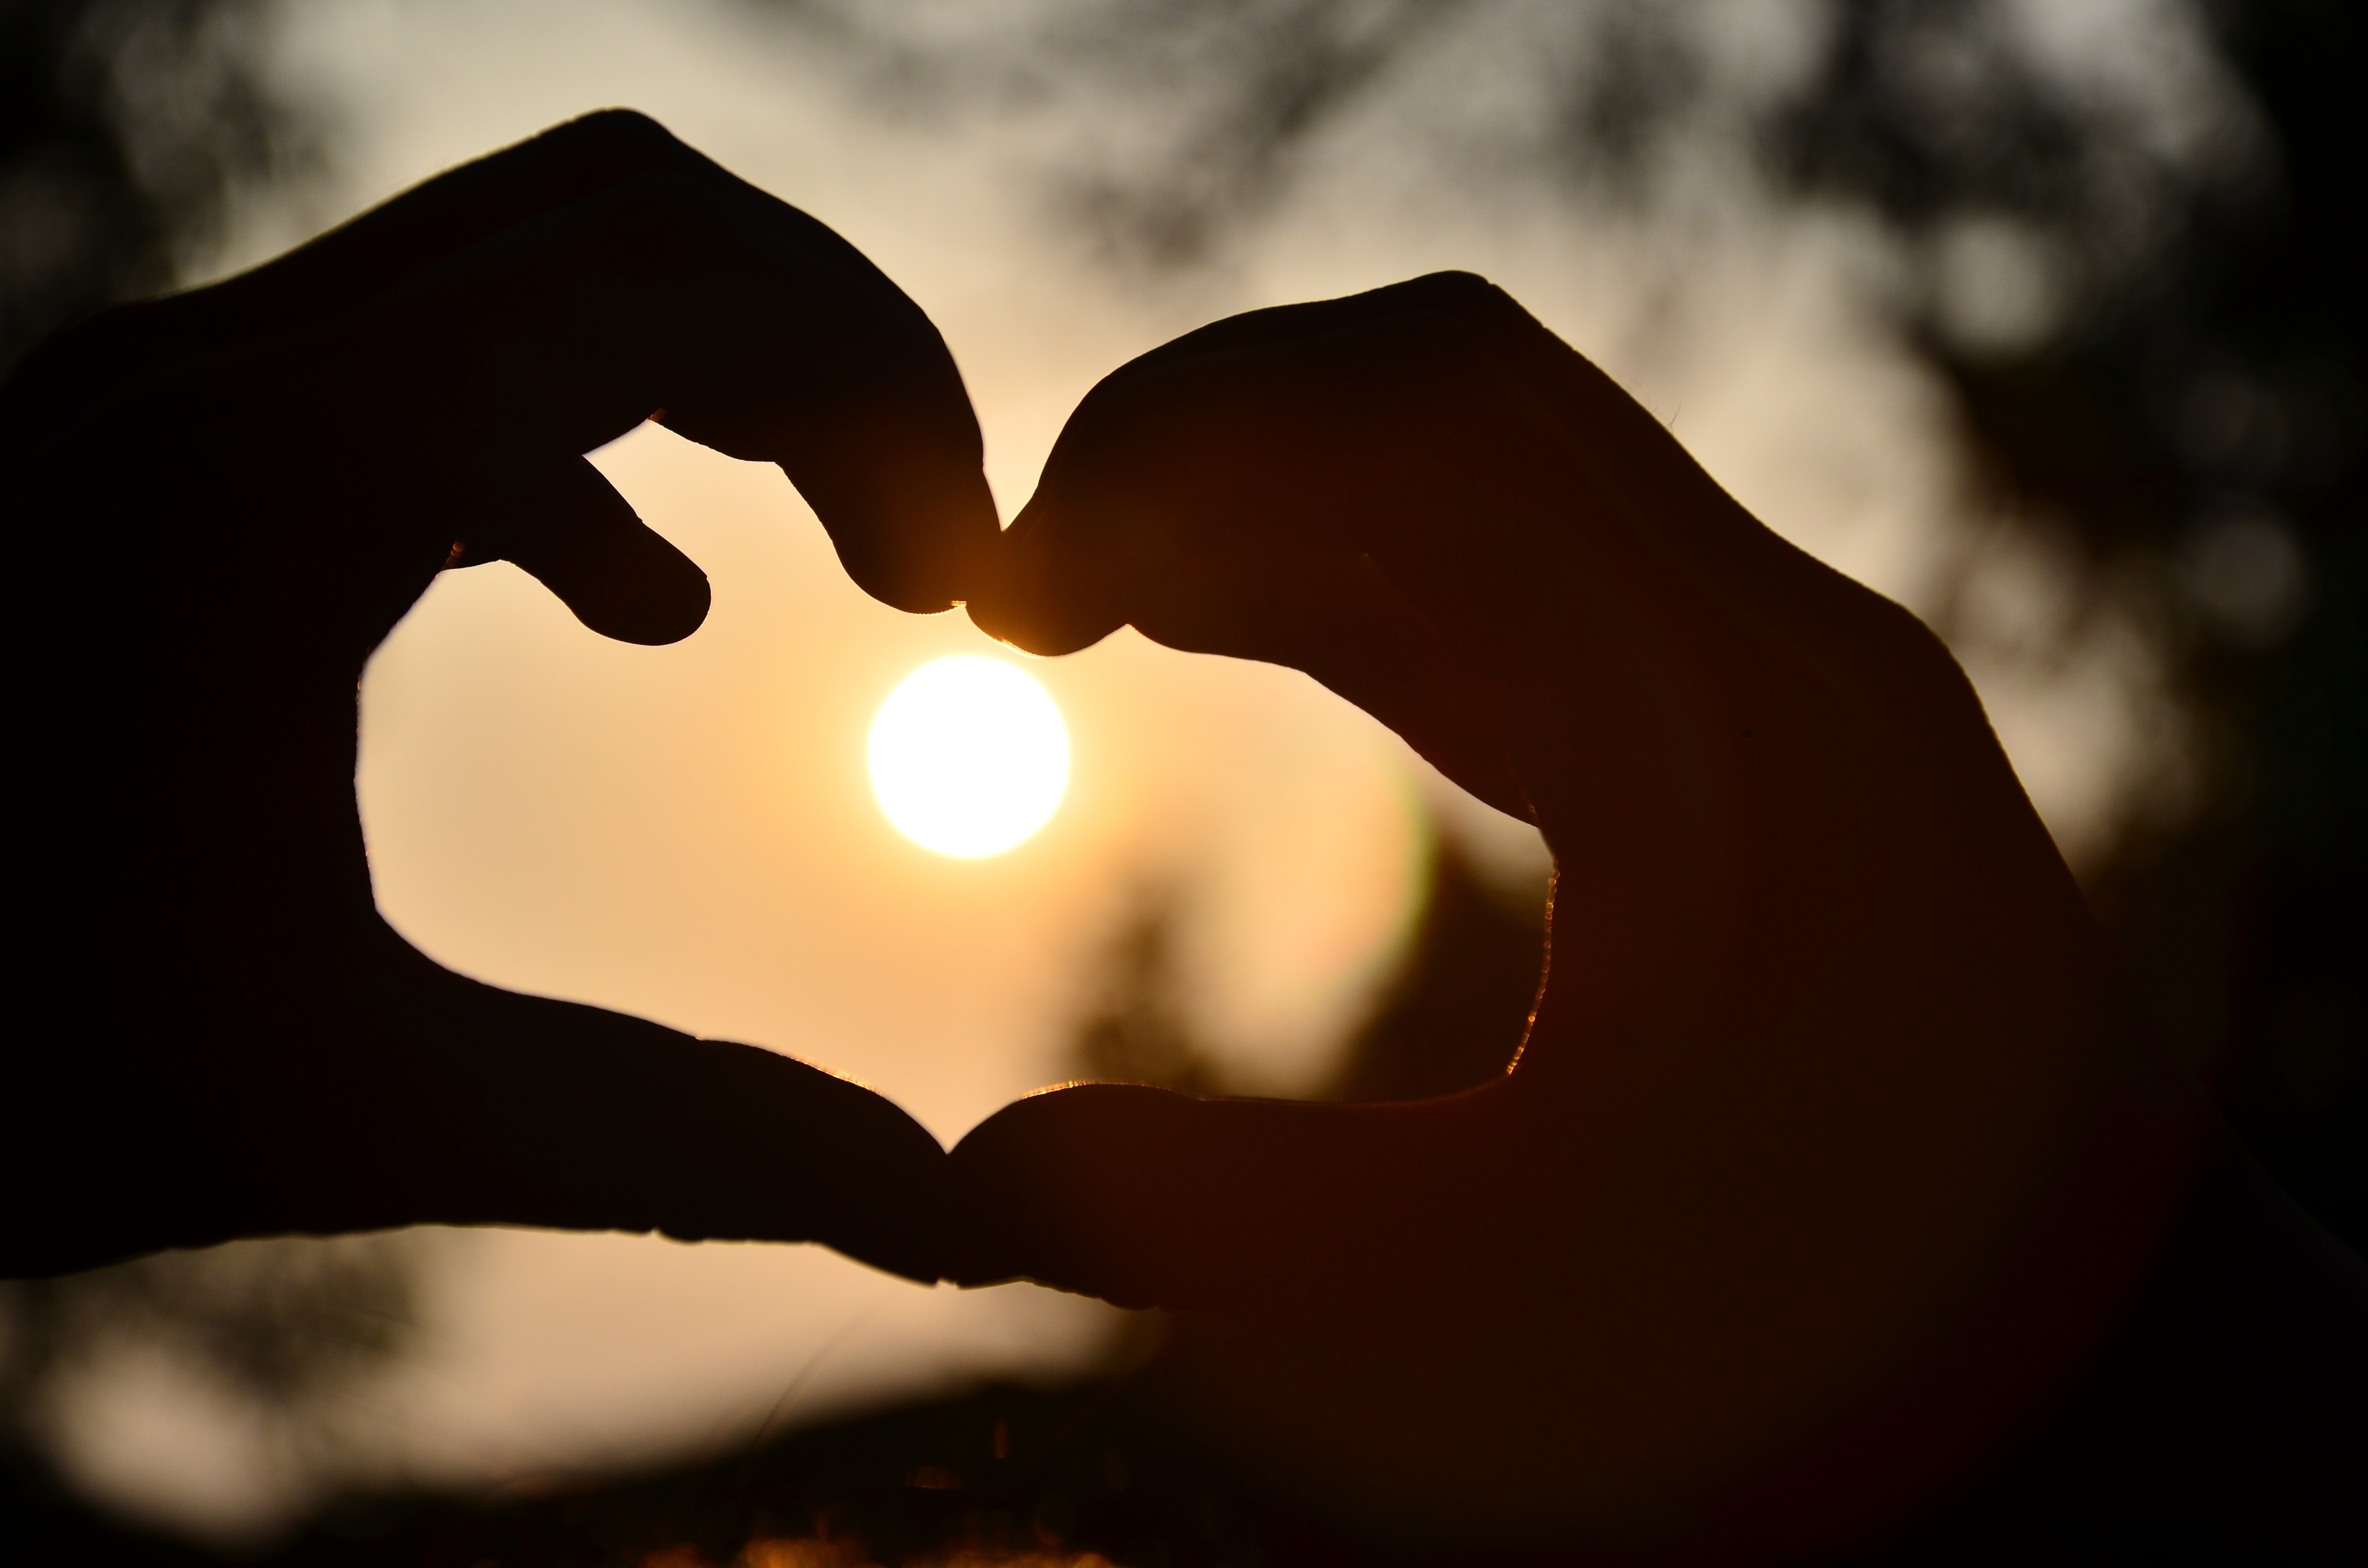 Silhouette of person hand doing heart shape during sunset photo